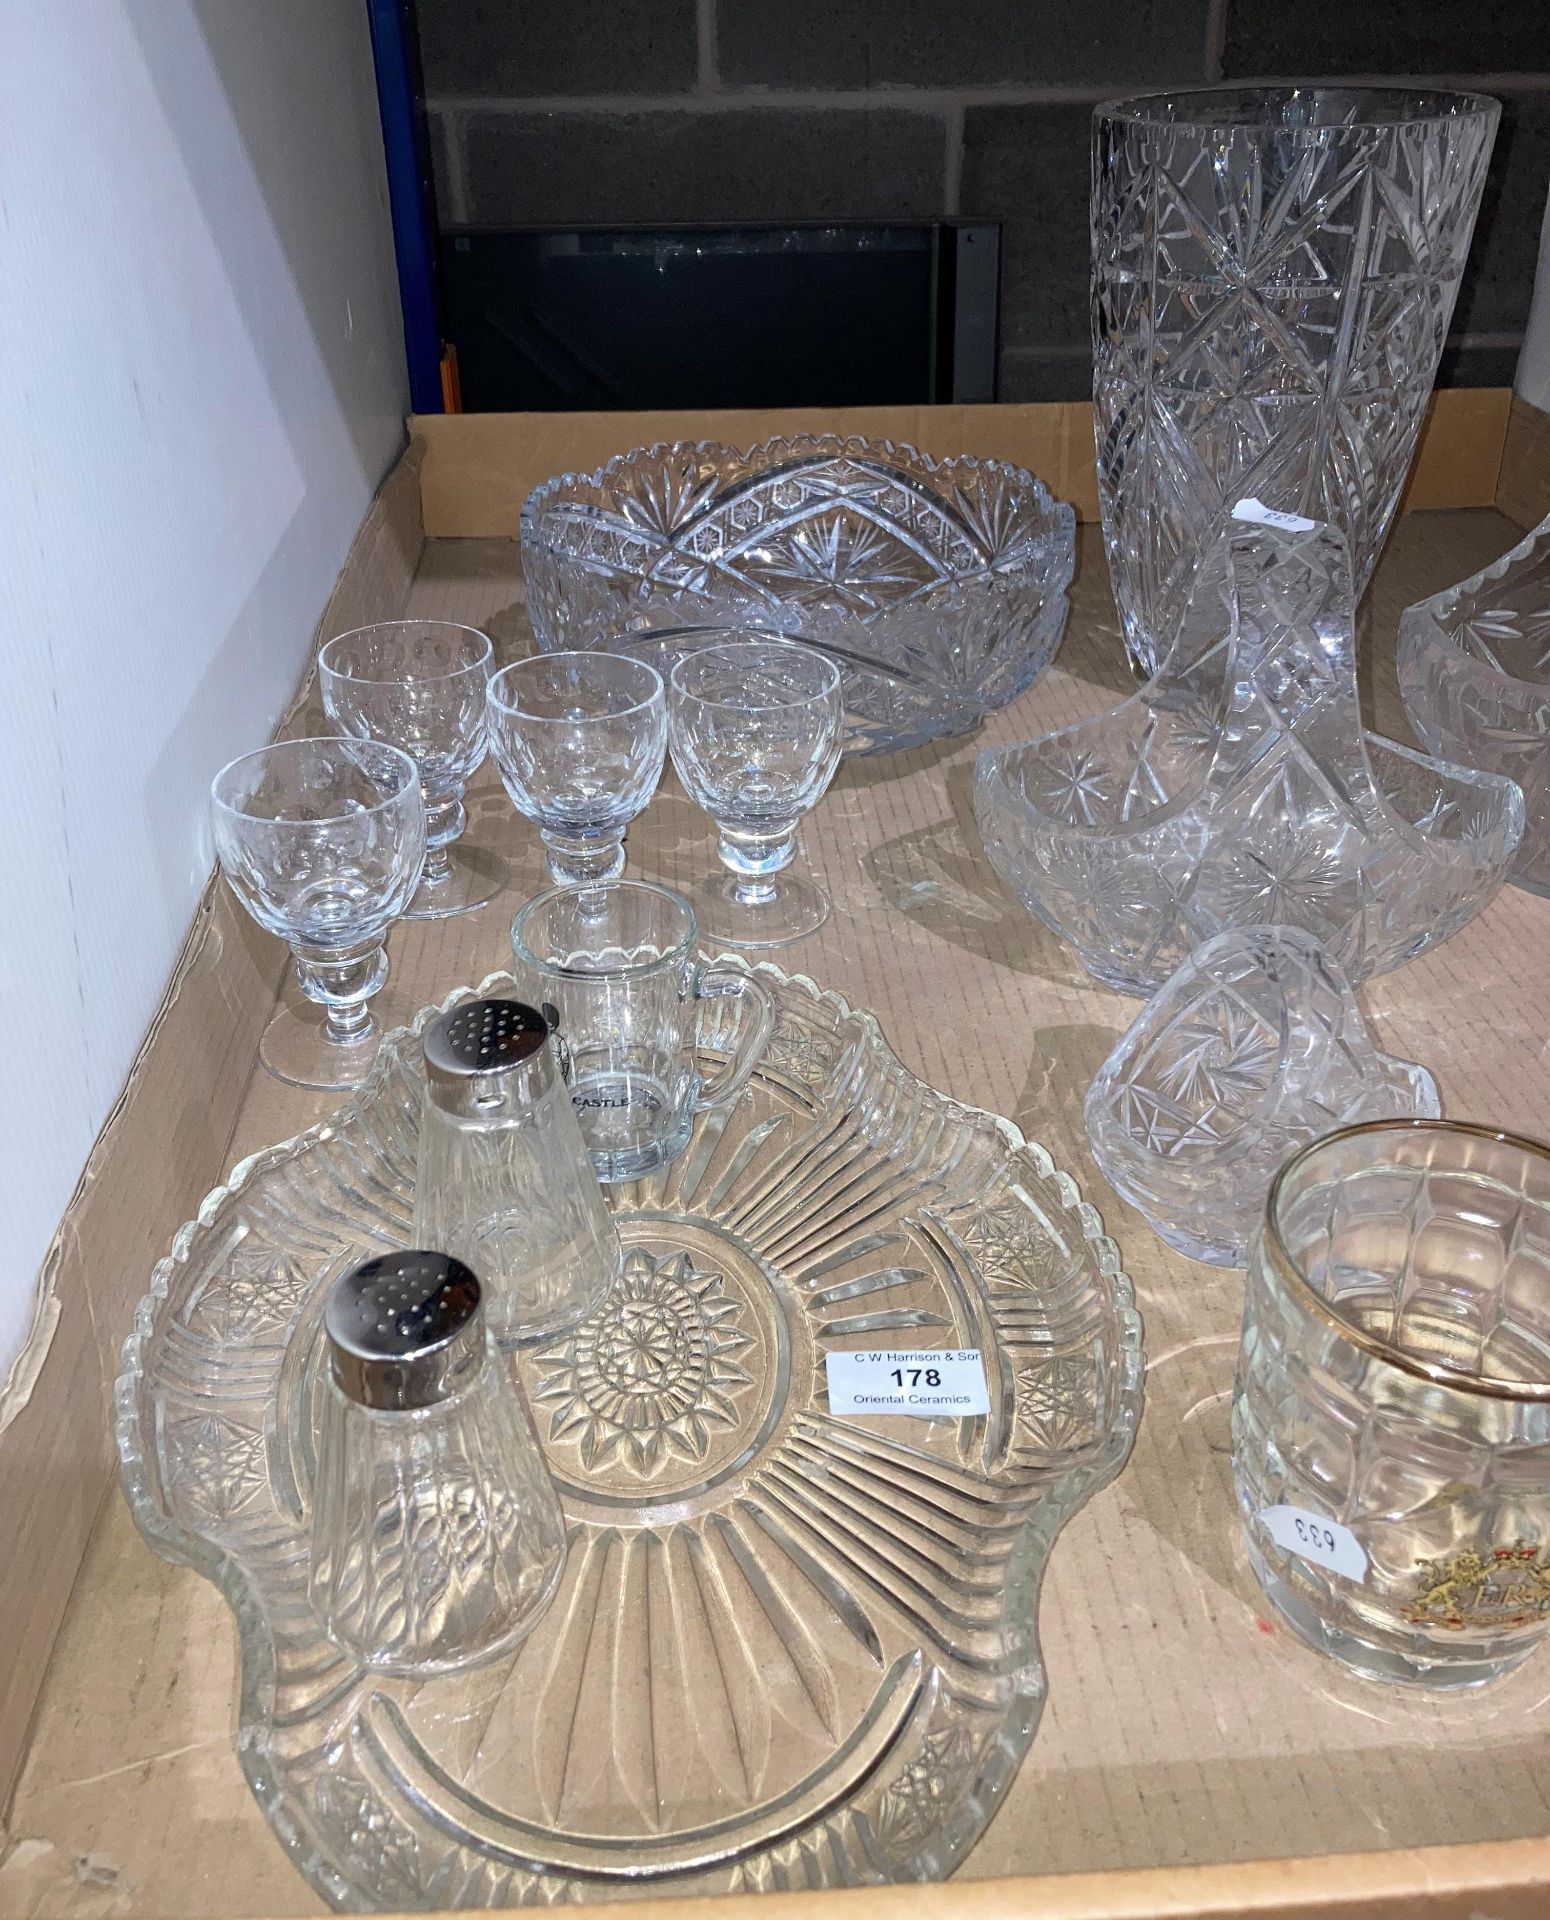 Contents to tray - seventeen assorted pieces of crystal and glassware including a vase, bowl, - Image 2 of 3